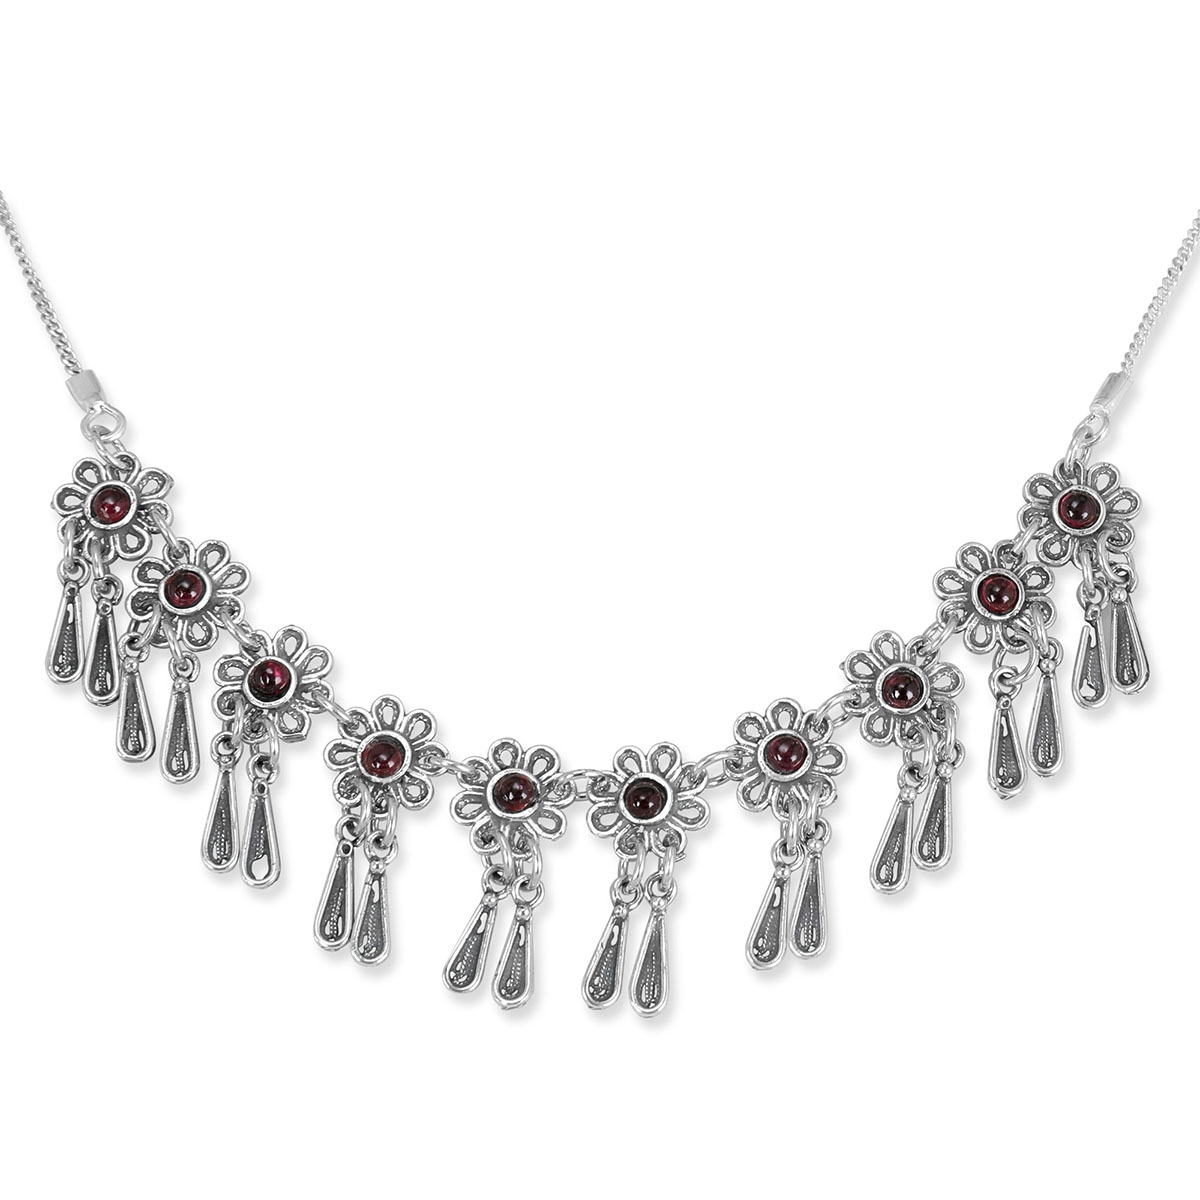 Traditional Yemenite Art Handcrafted Sterling Silver and Indian Garnet Necklace With Flower and Teardrop Design - 1